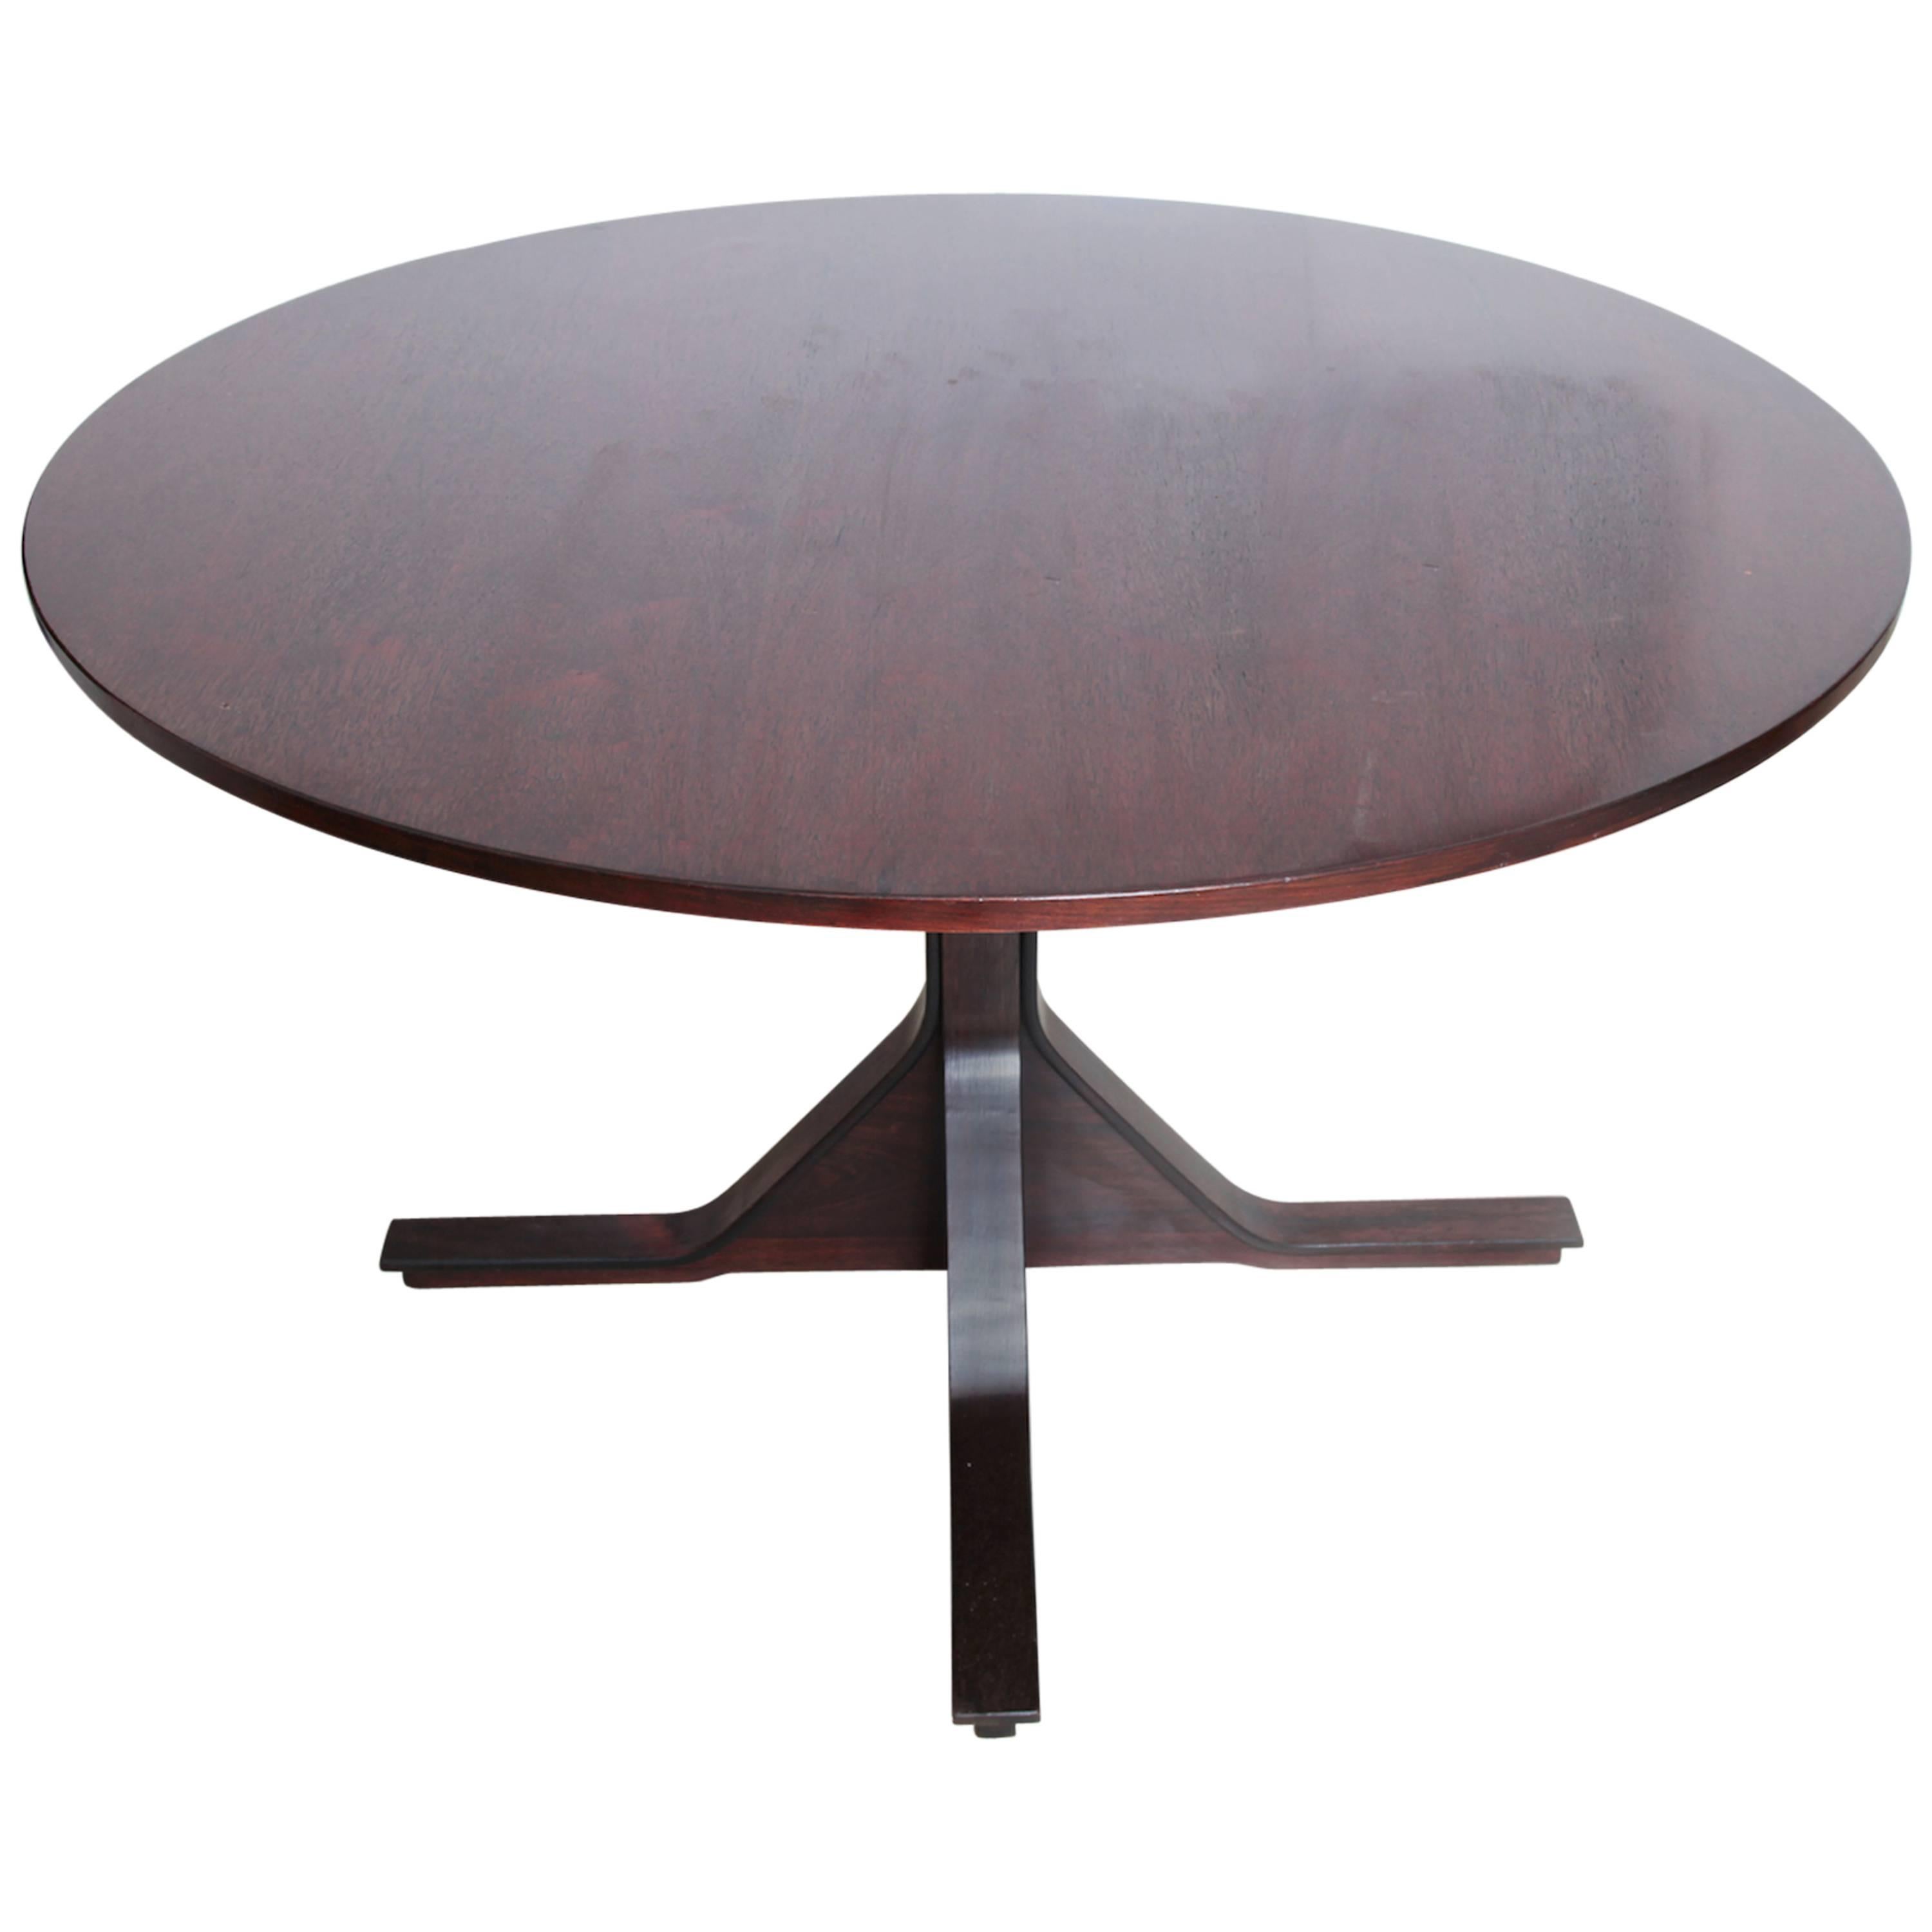 Gianfranco Frattini Dining Table "522, " Manufactured by Bernini, 1960 For Sale